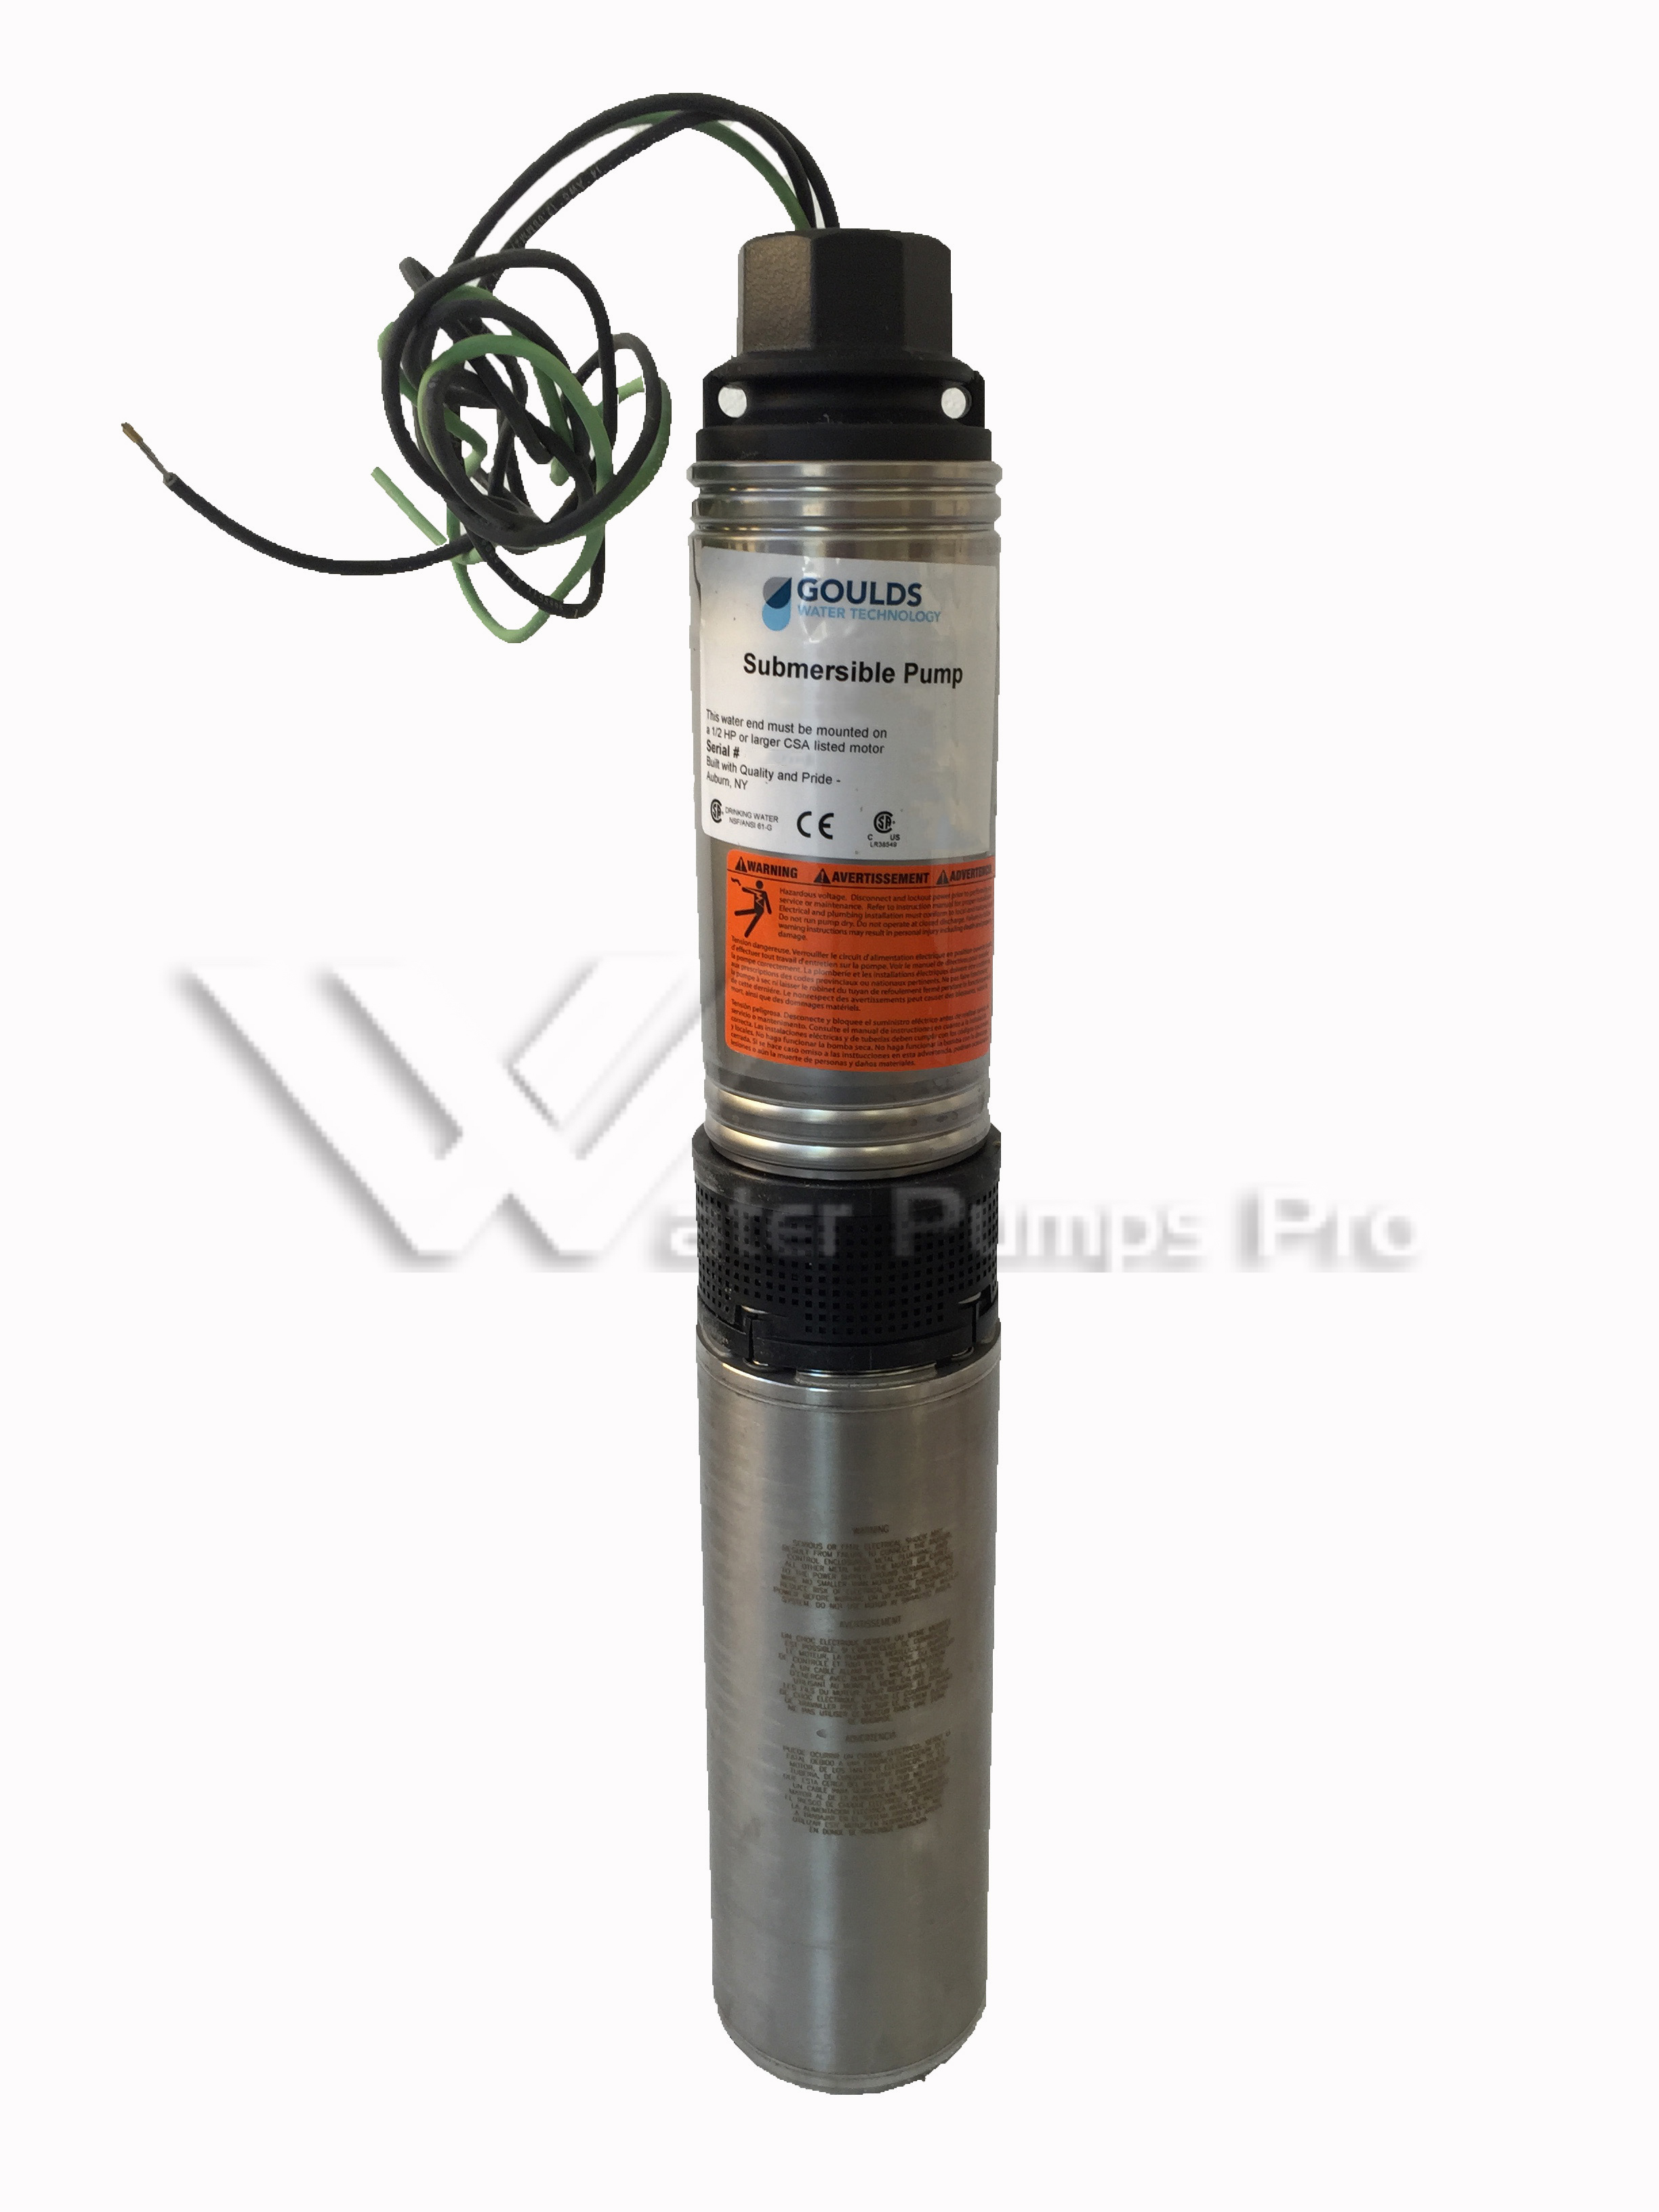 Goulds 25HS15422C Submersible Water Well Pump 1.5HP 230V 2Wire